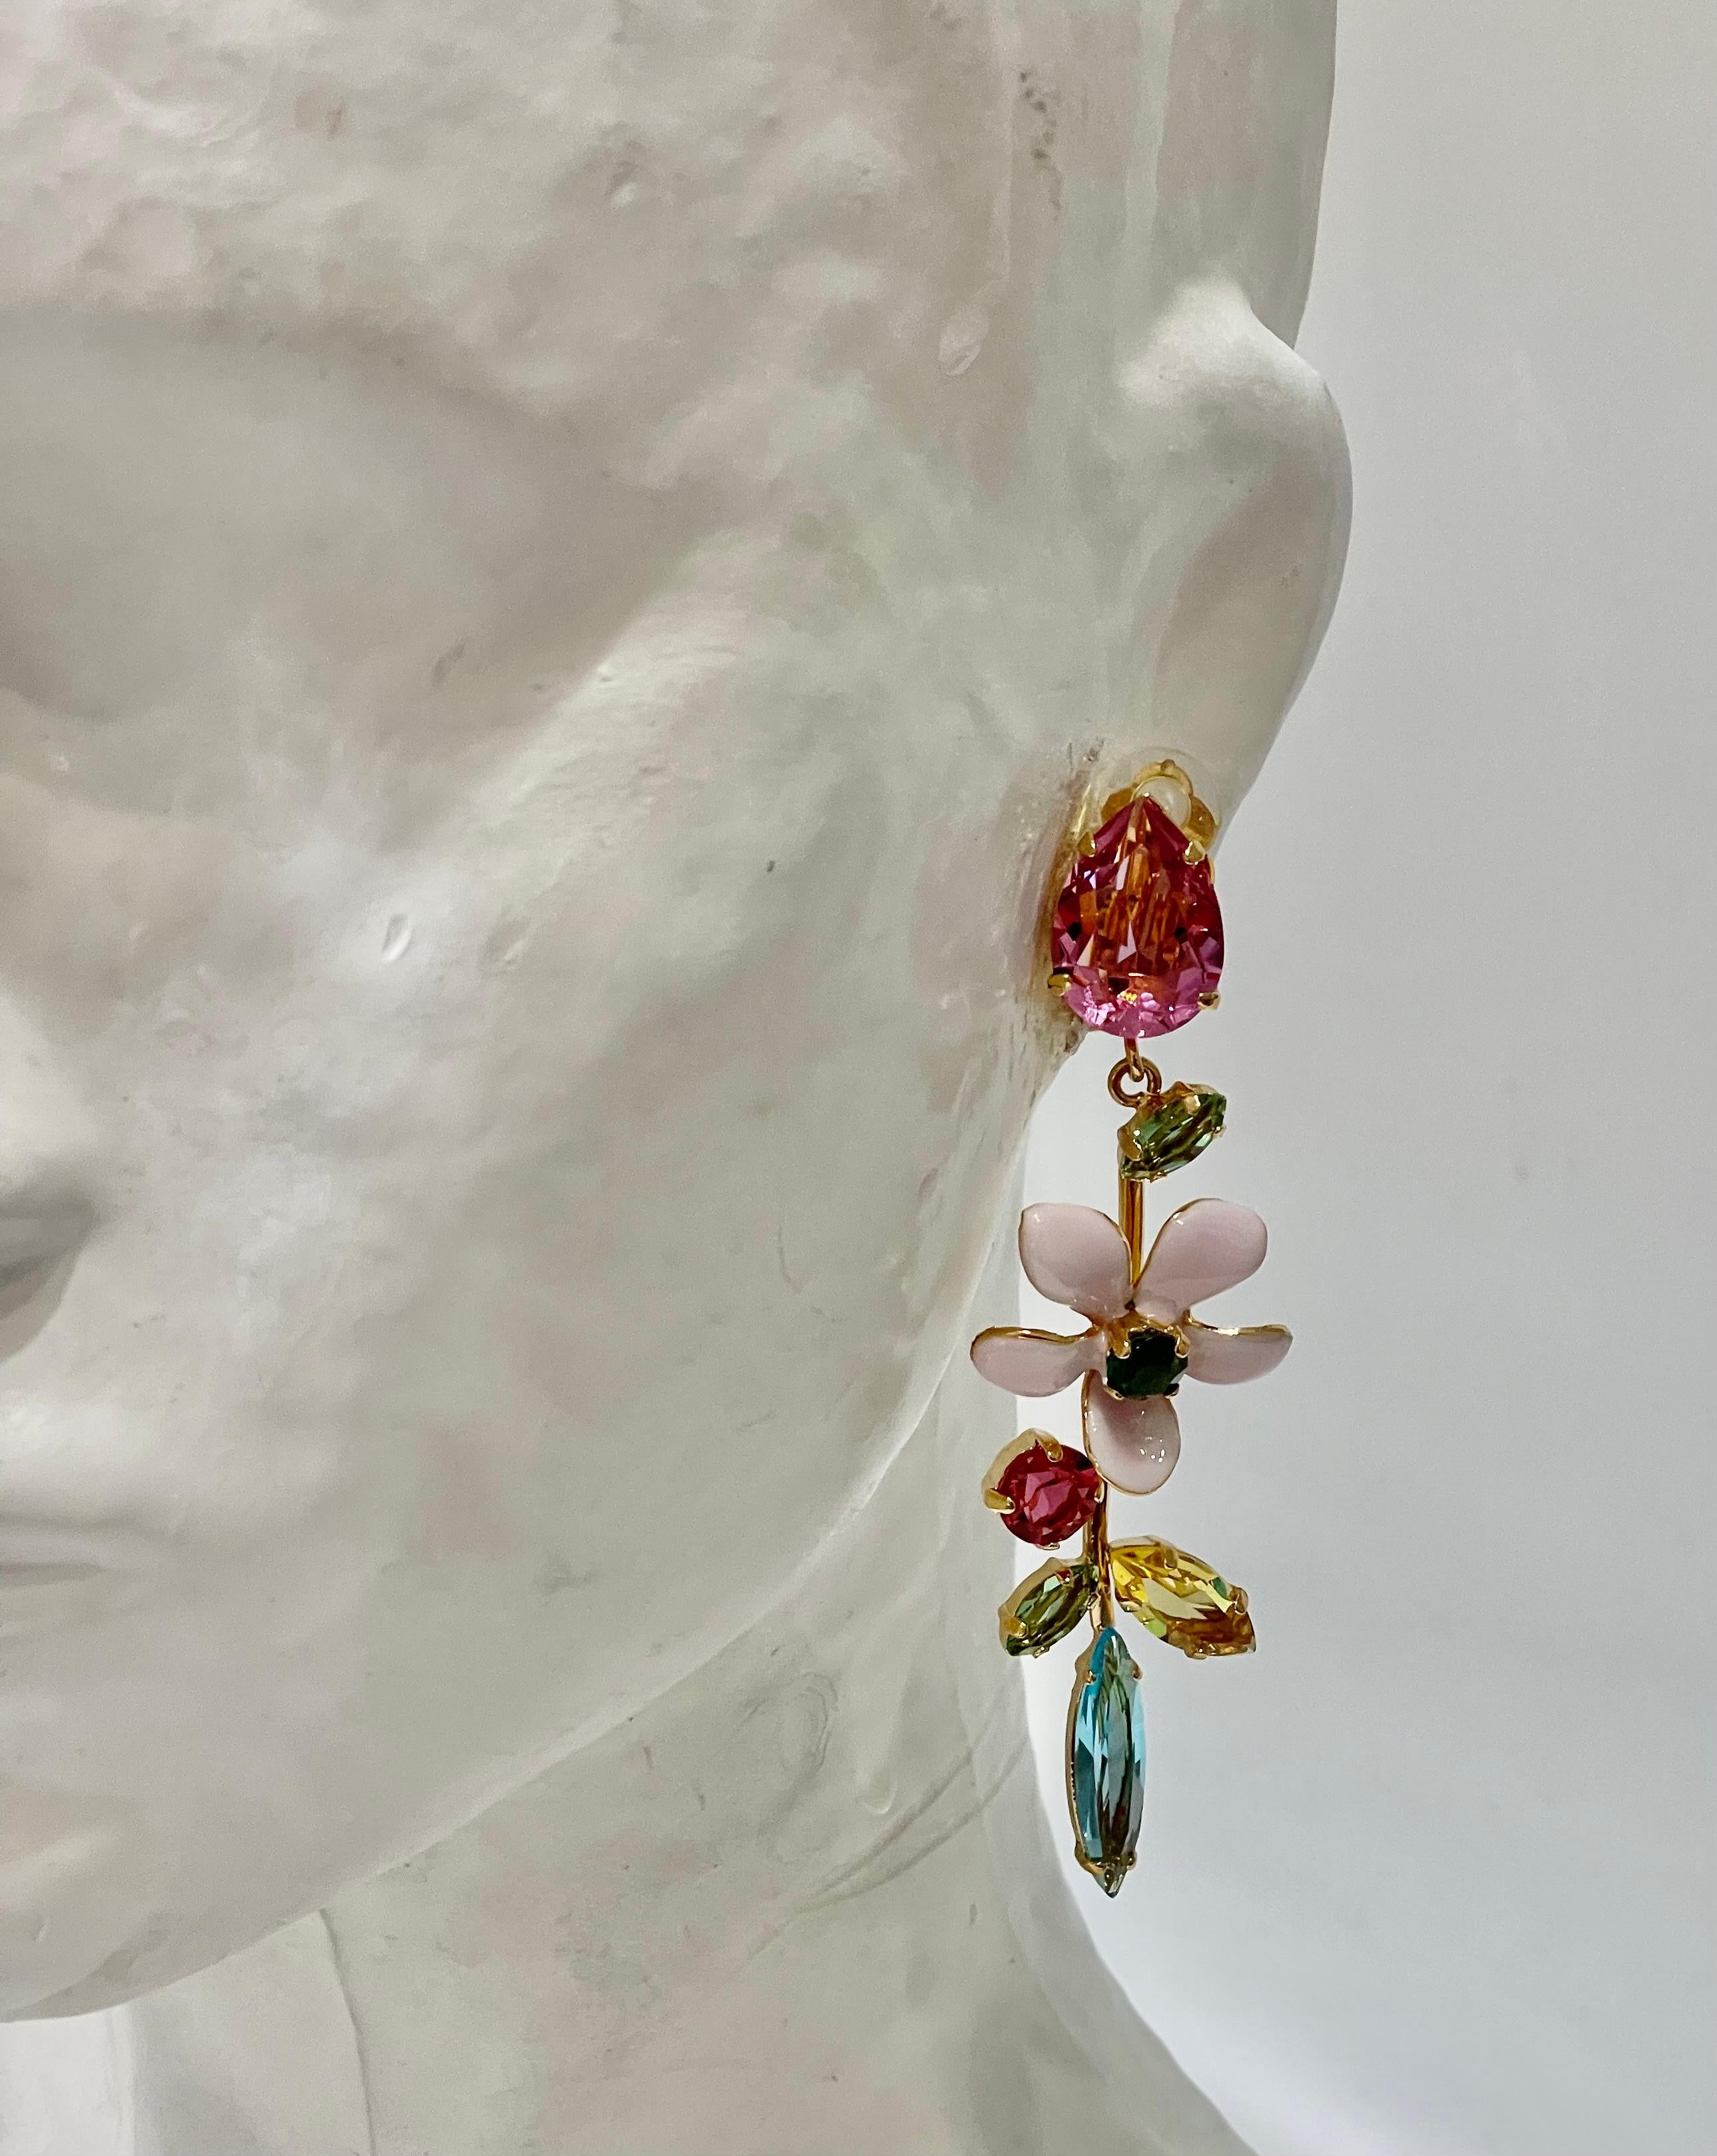 Made in France
Philippe Ferrandis, French luxury designer. 
His jewels are hand-made in his workshops in Paris, 
in the respect of an exceptional know-how.
Lush, luxuriant and naive, this floral collection with bright colors and translucent
and